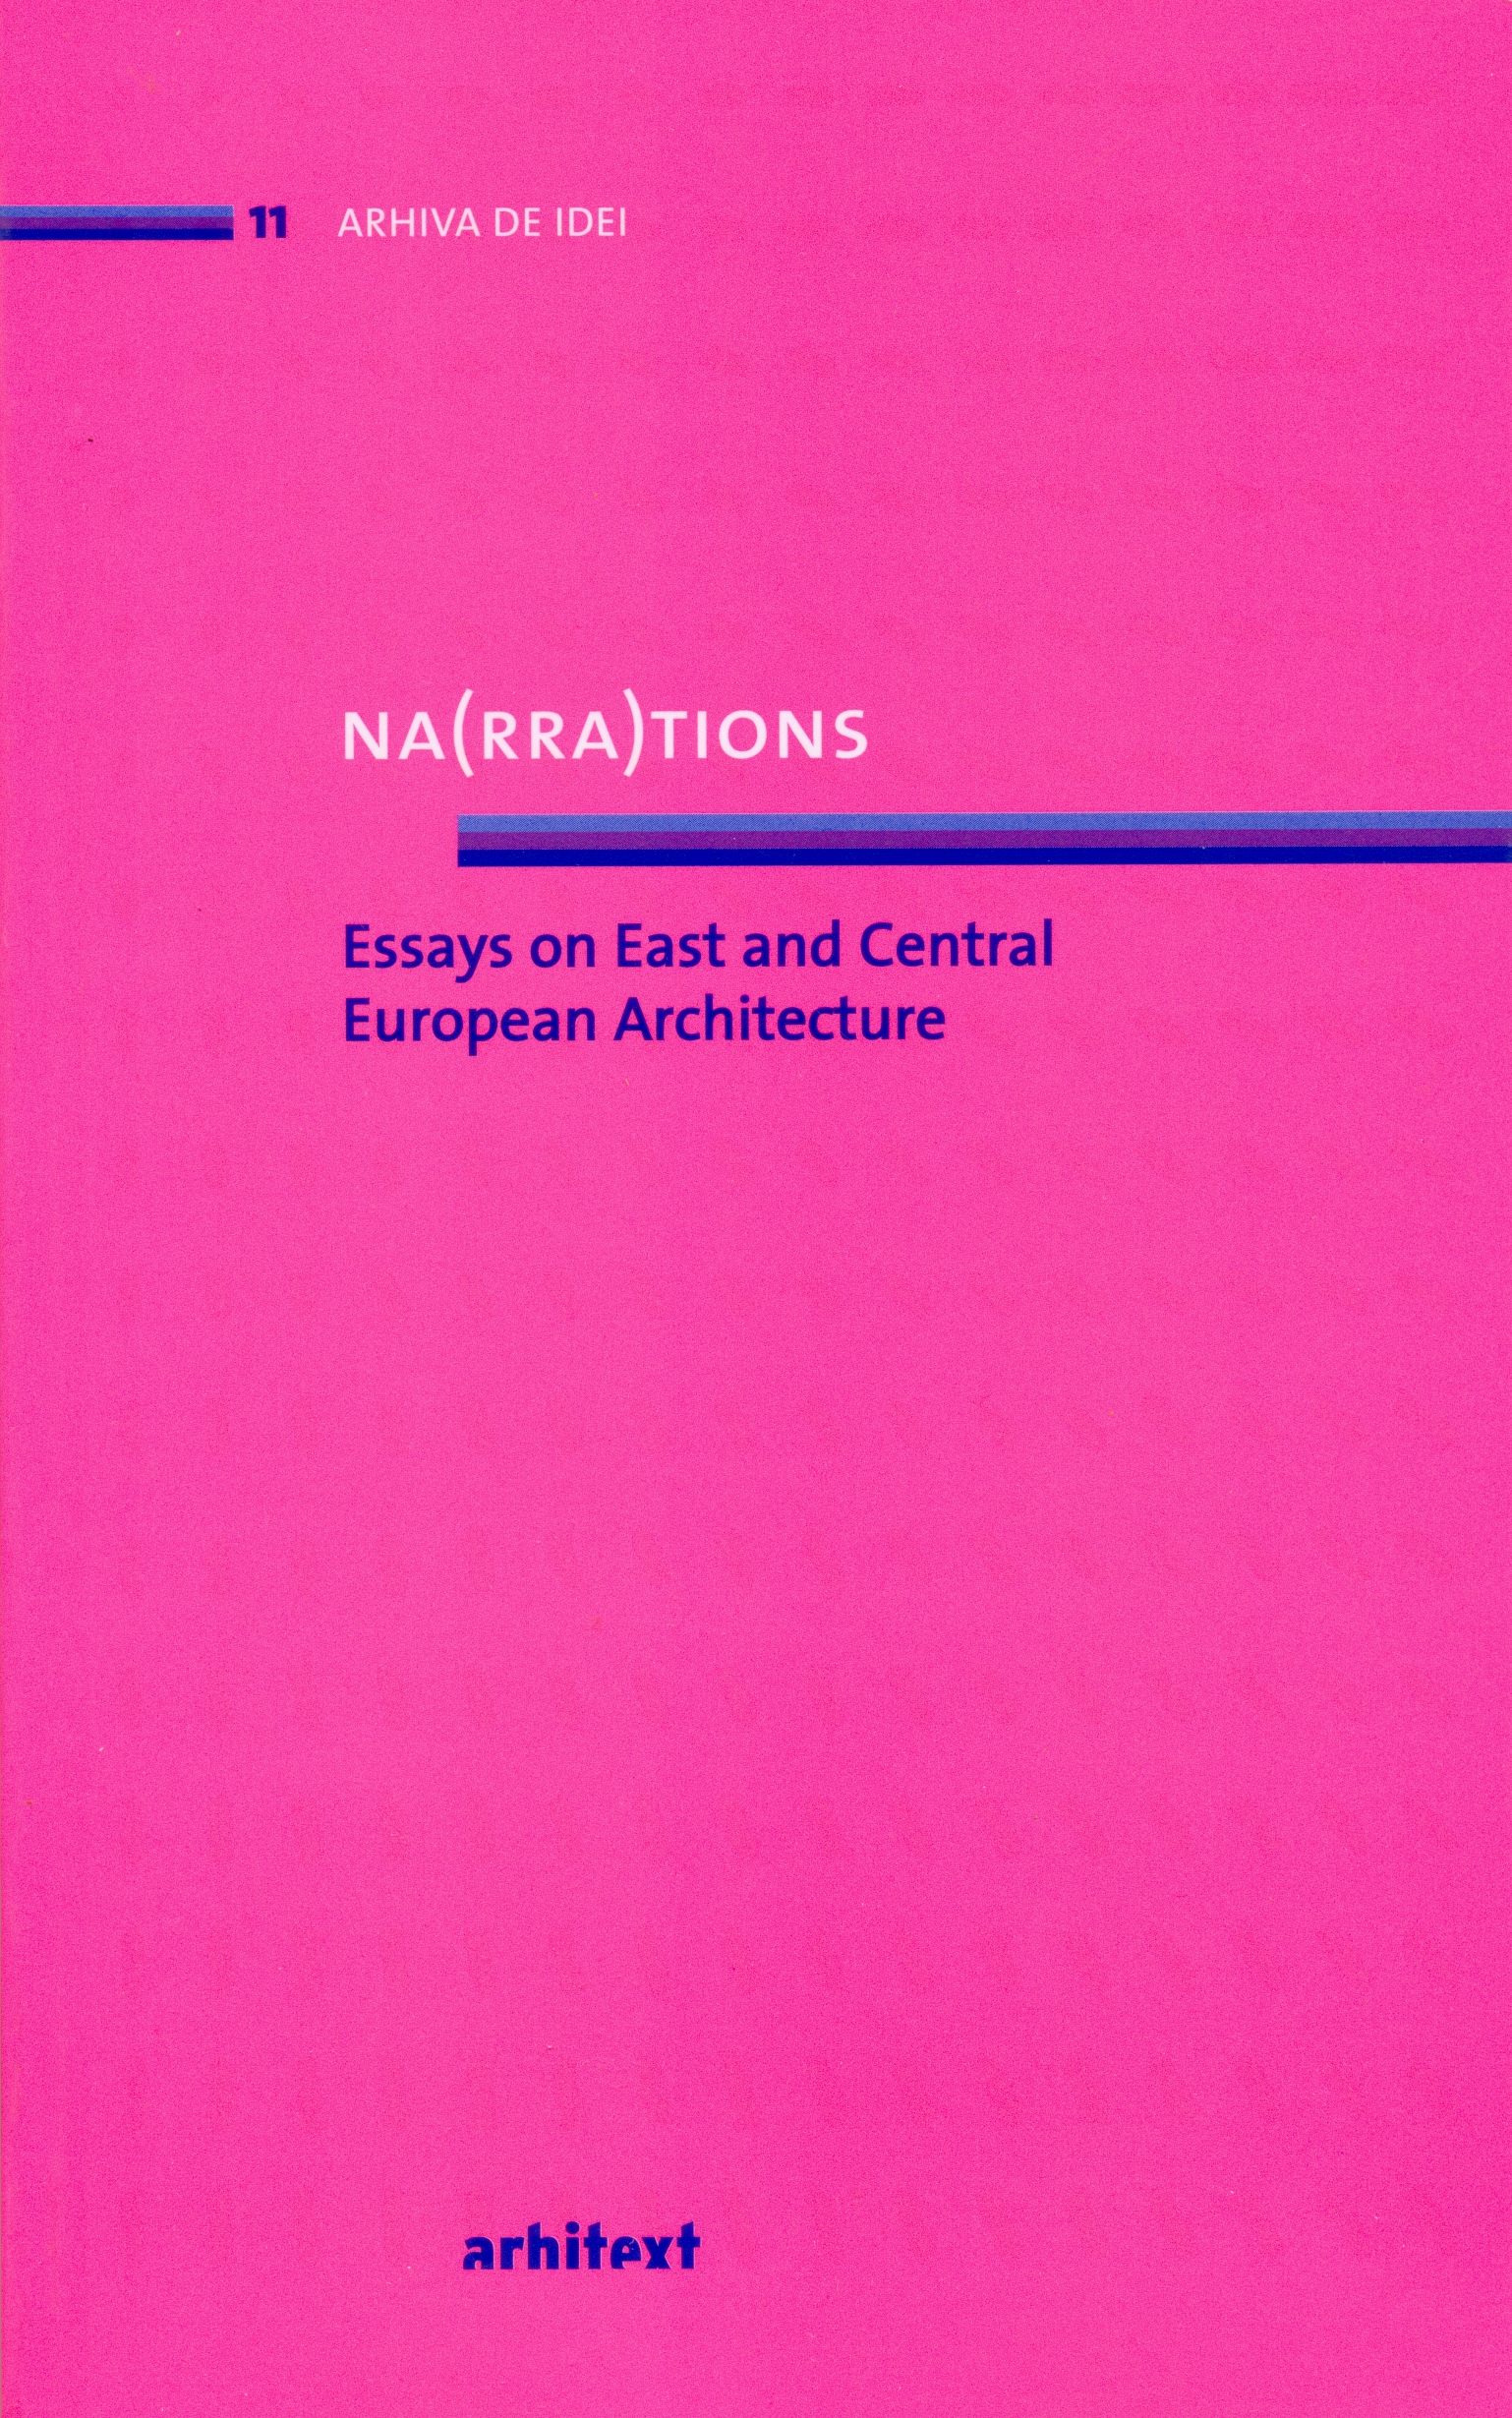 Na(rra)tions. Essays on East and Central European Architecture |